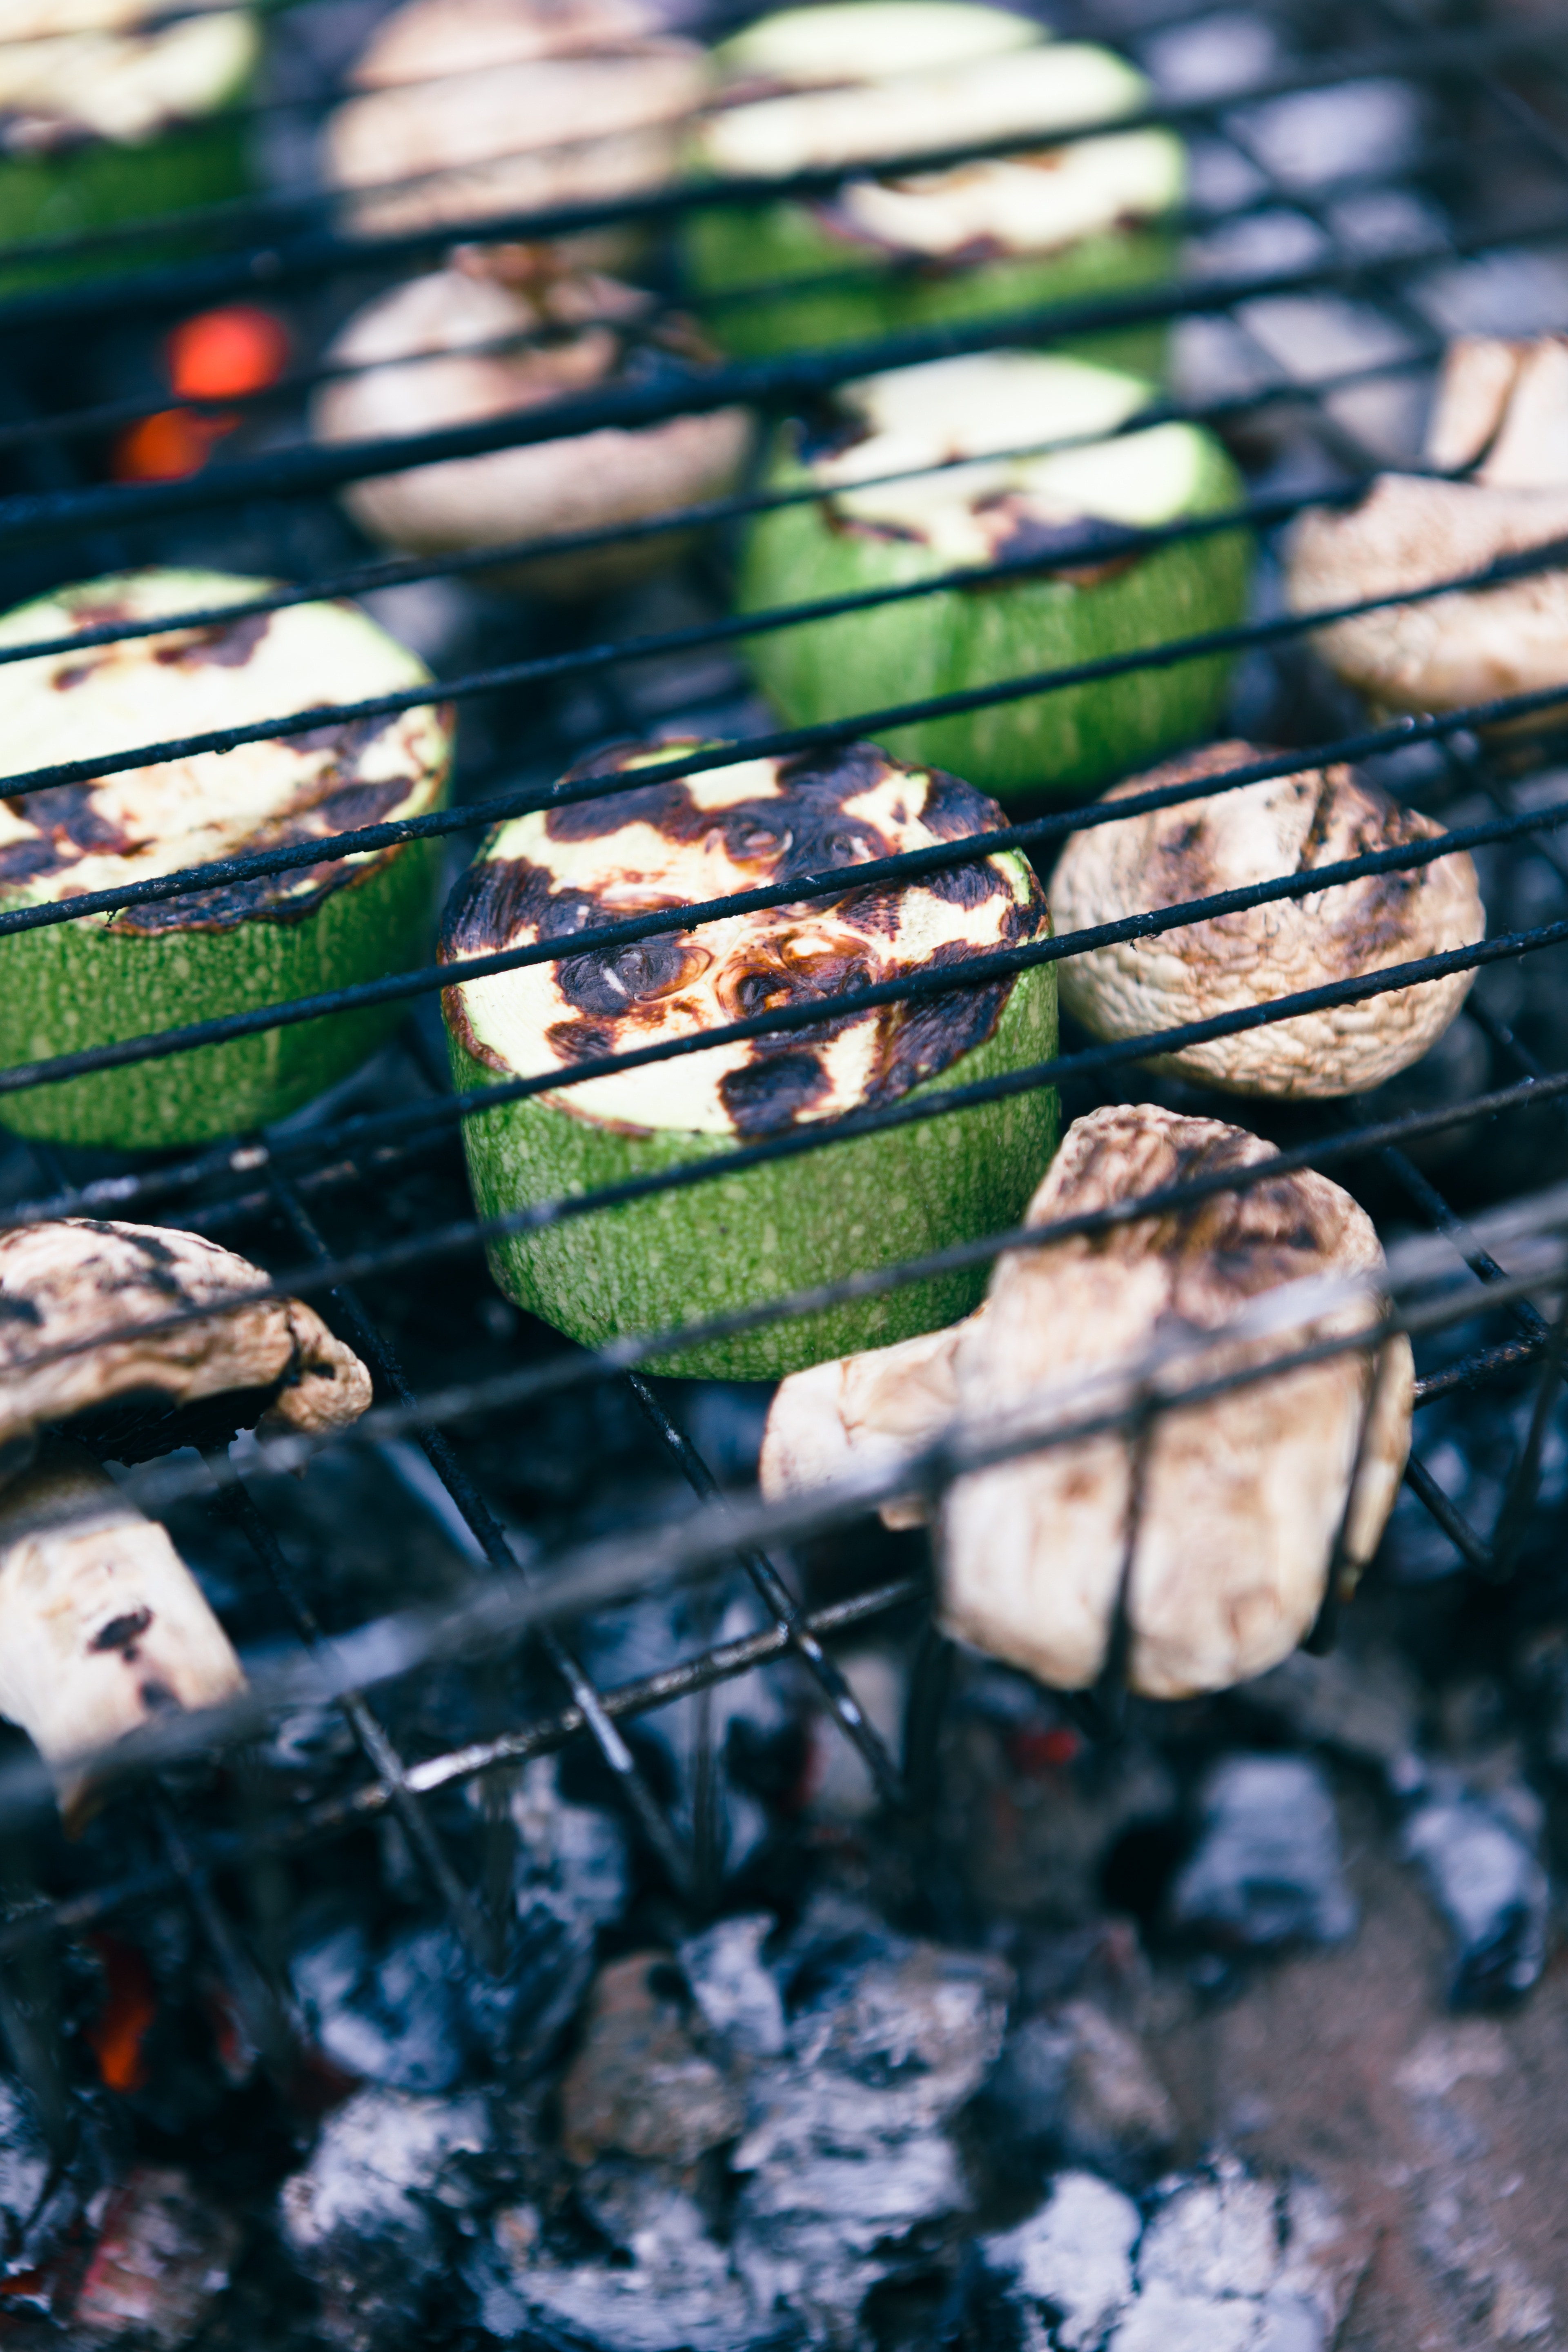 grilled mushrooms and cucumbers on charcoal grill